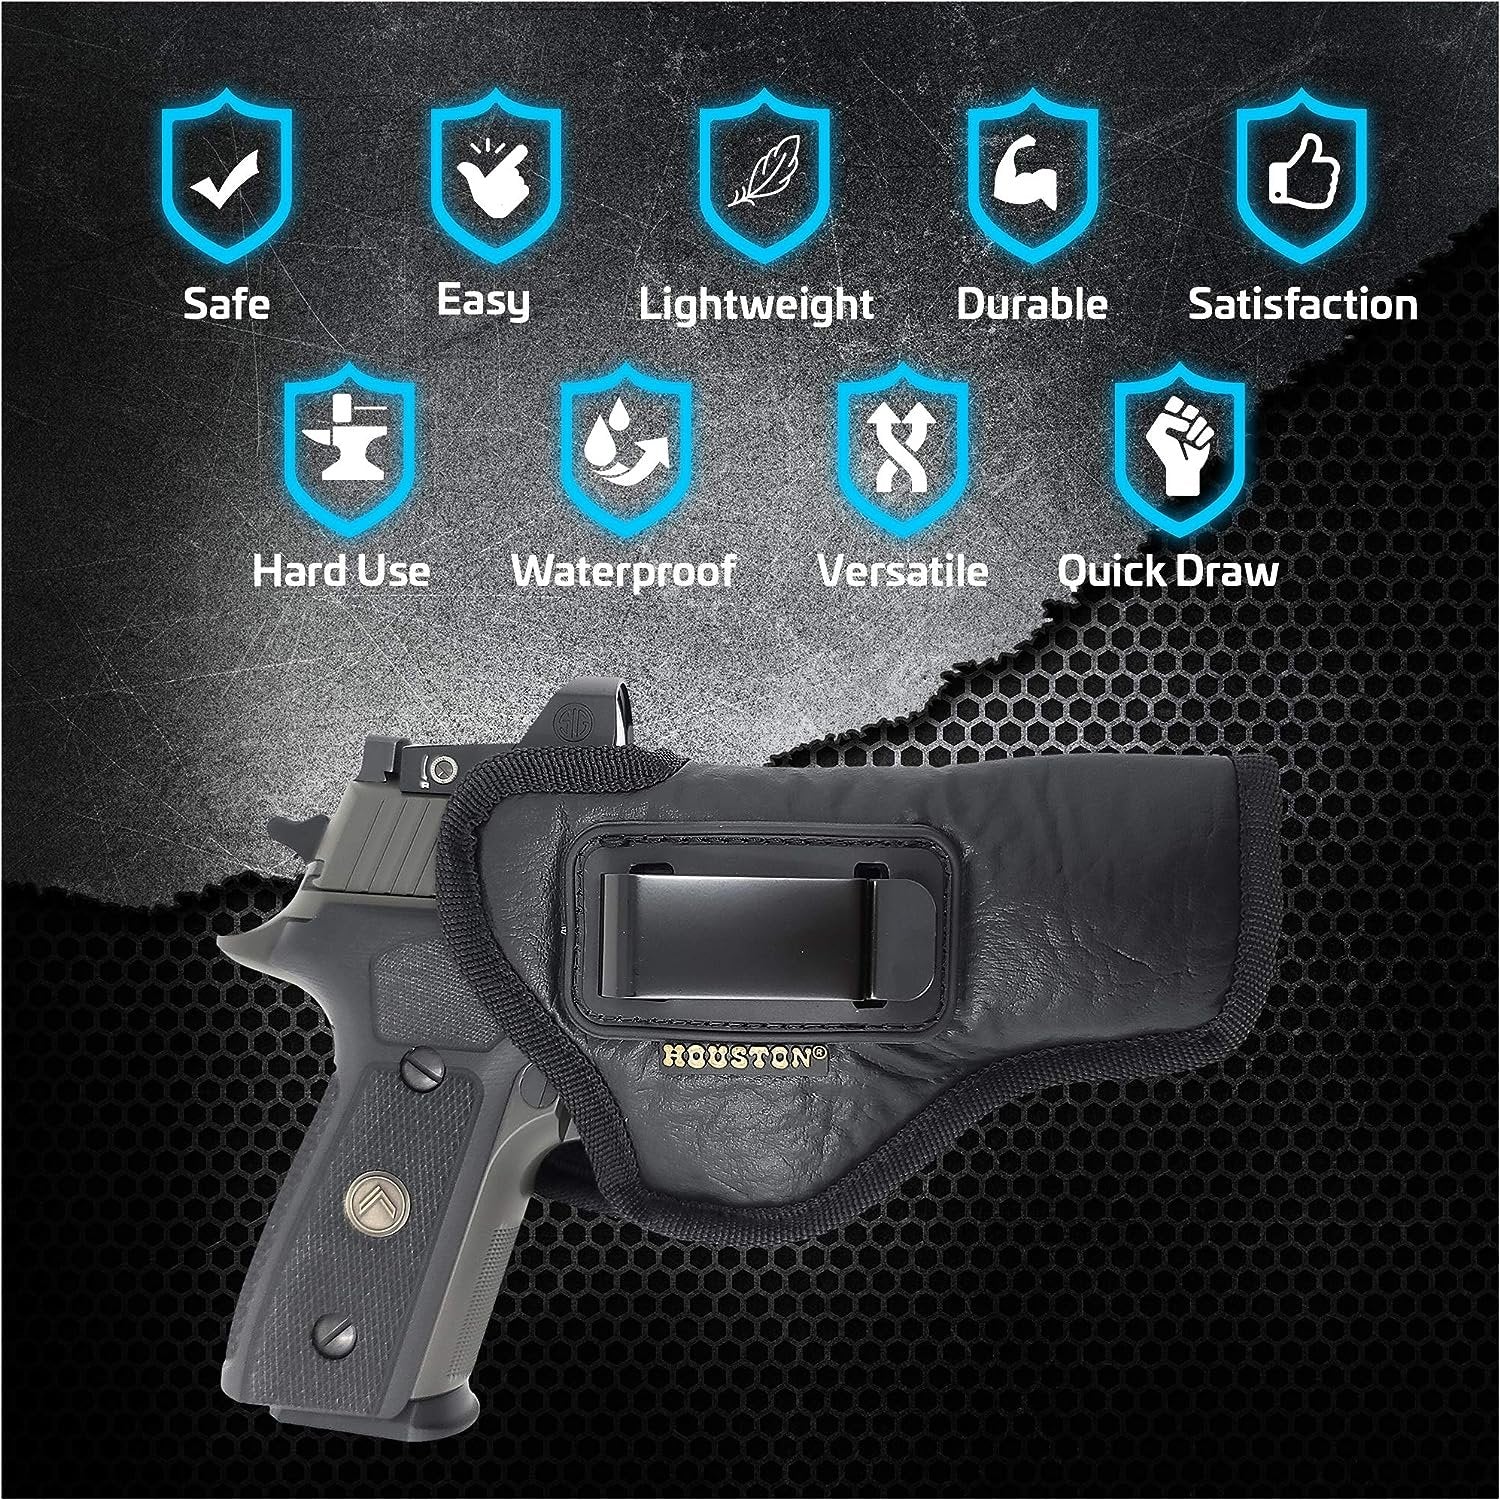 IWB Optical Gun Holster by Houston - ECO Leather Concealed Carry Soft Material | FITS Beretta 92FS | FN 5.7 | Canik TP9 SFX | RGR 57 | SIG P320 X5 | Beretta APX Target | GLK 34 35 41 (Right) Black